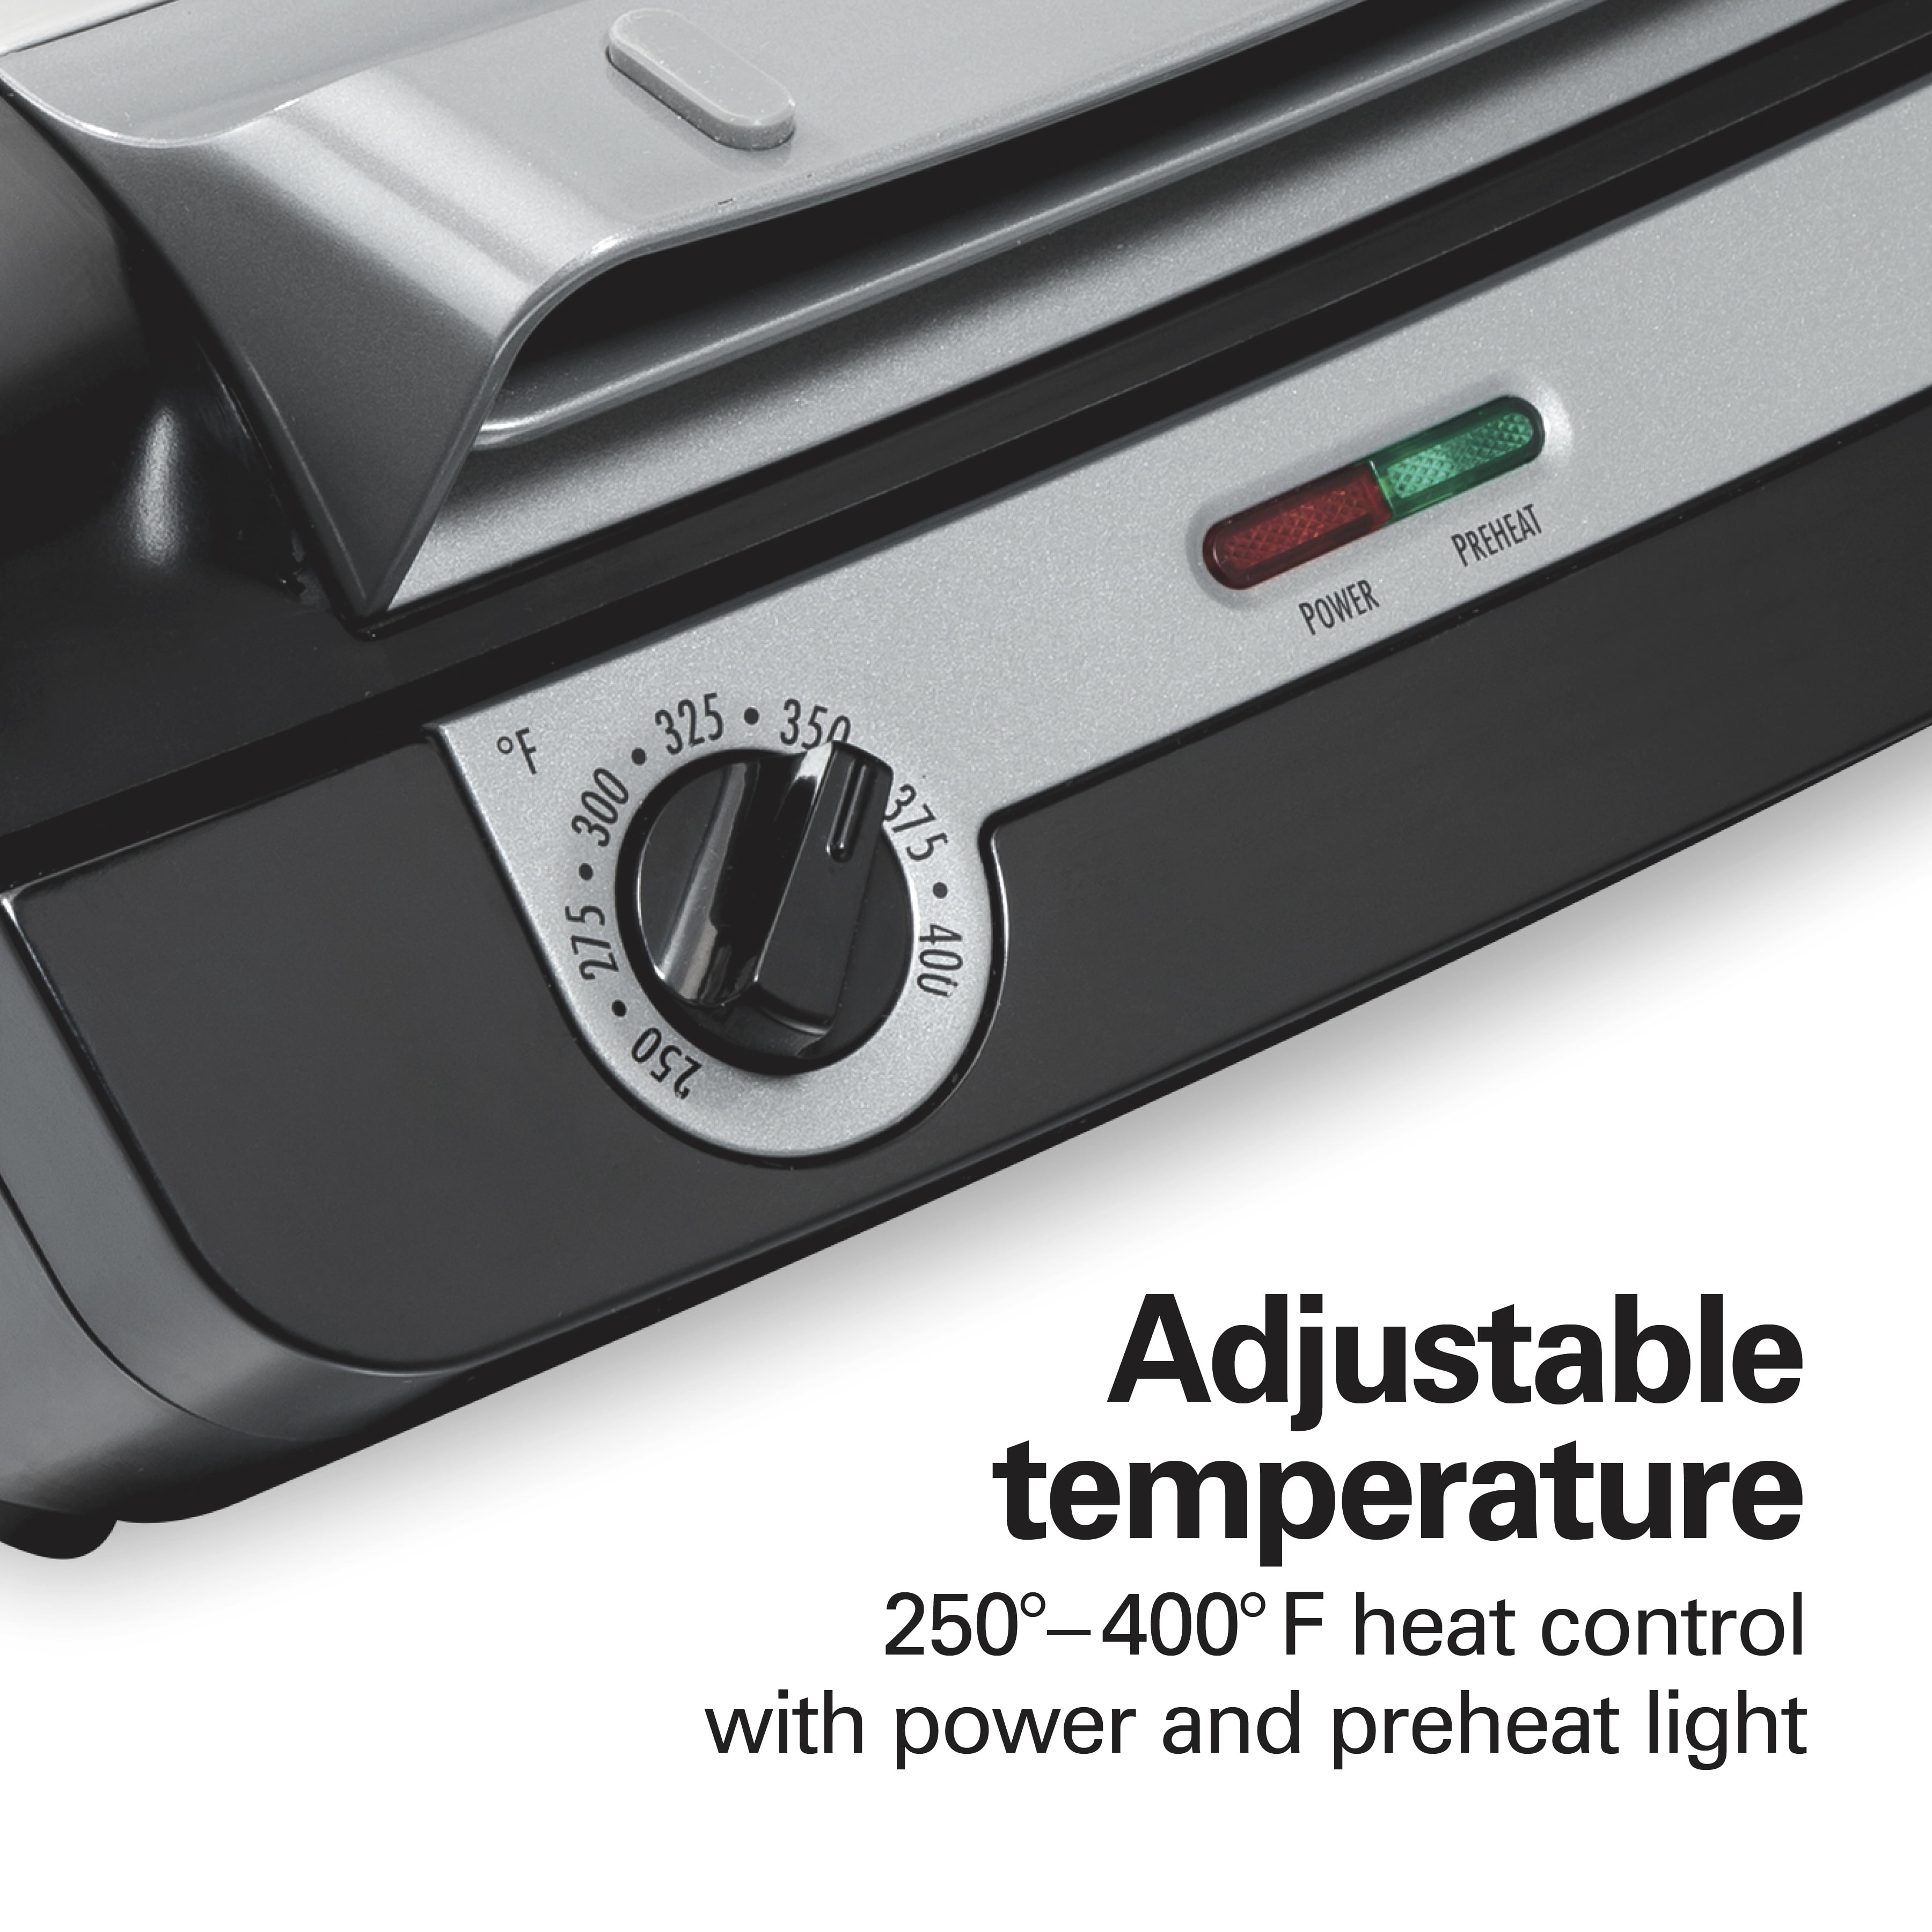 Hamilton Beach 3-in-1 Electric Indoor Grill/Griddle, 180 Sq. in. Nonstick  Cooking Surface, Adjustable Temperature Up to 425°F, Black, 38546